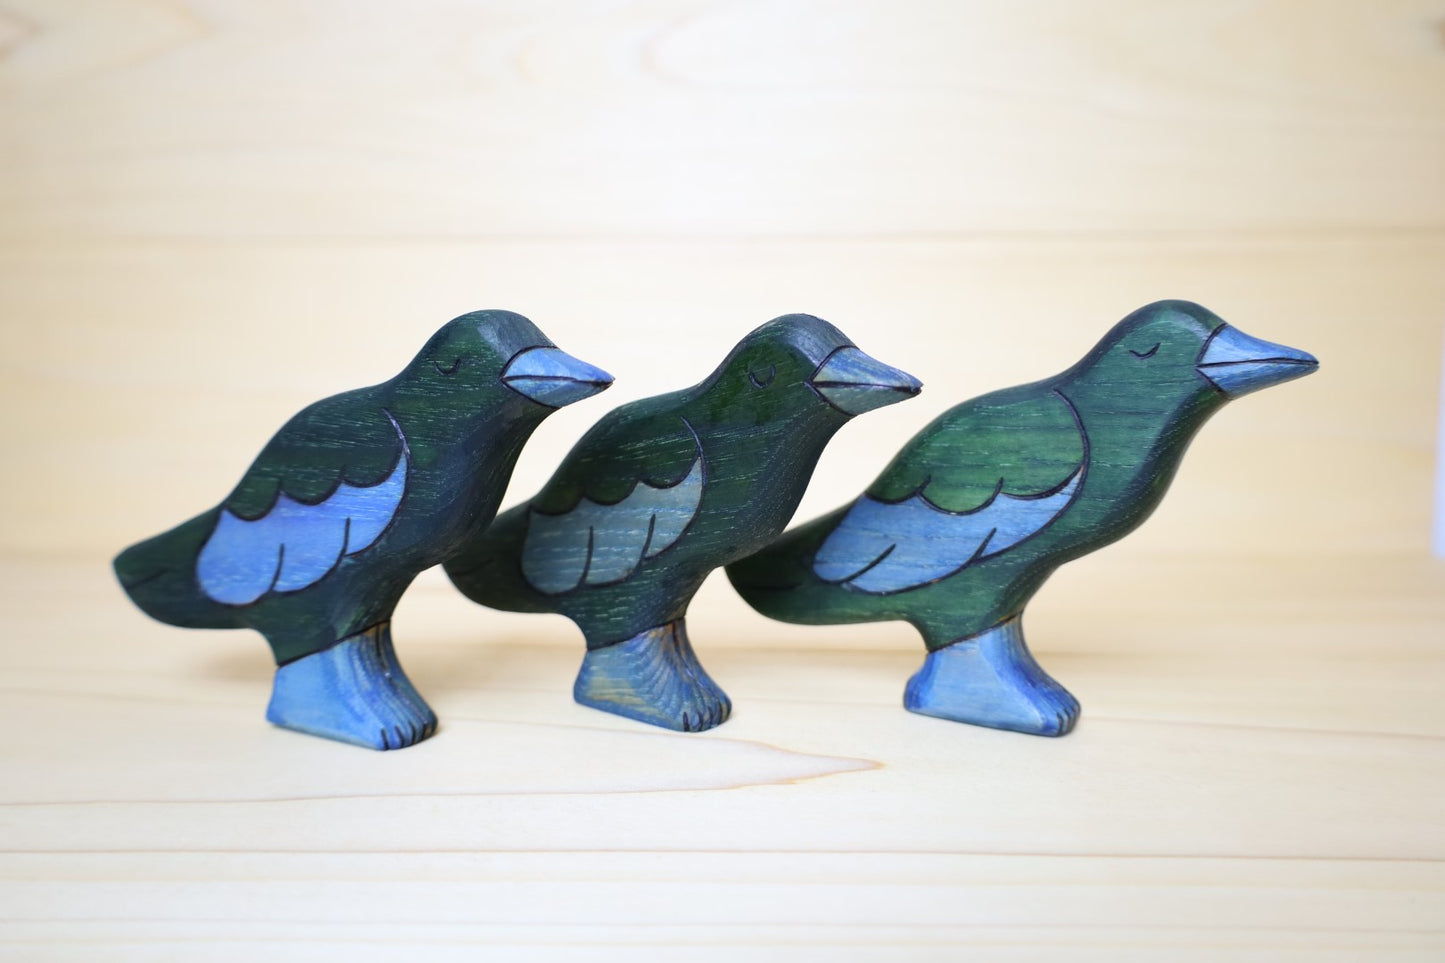 Wooden Raven Toy